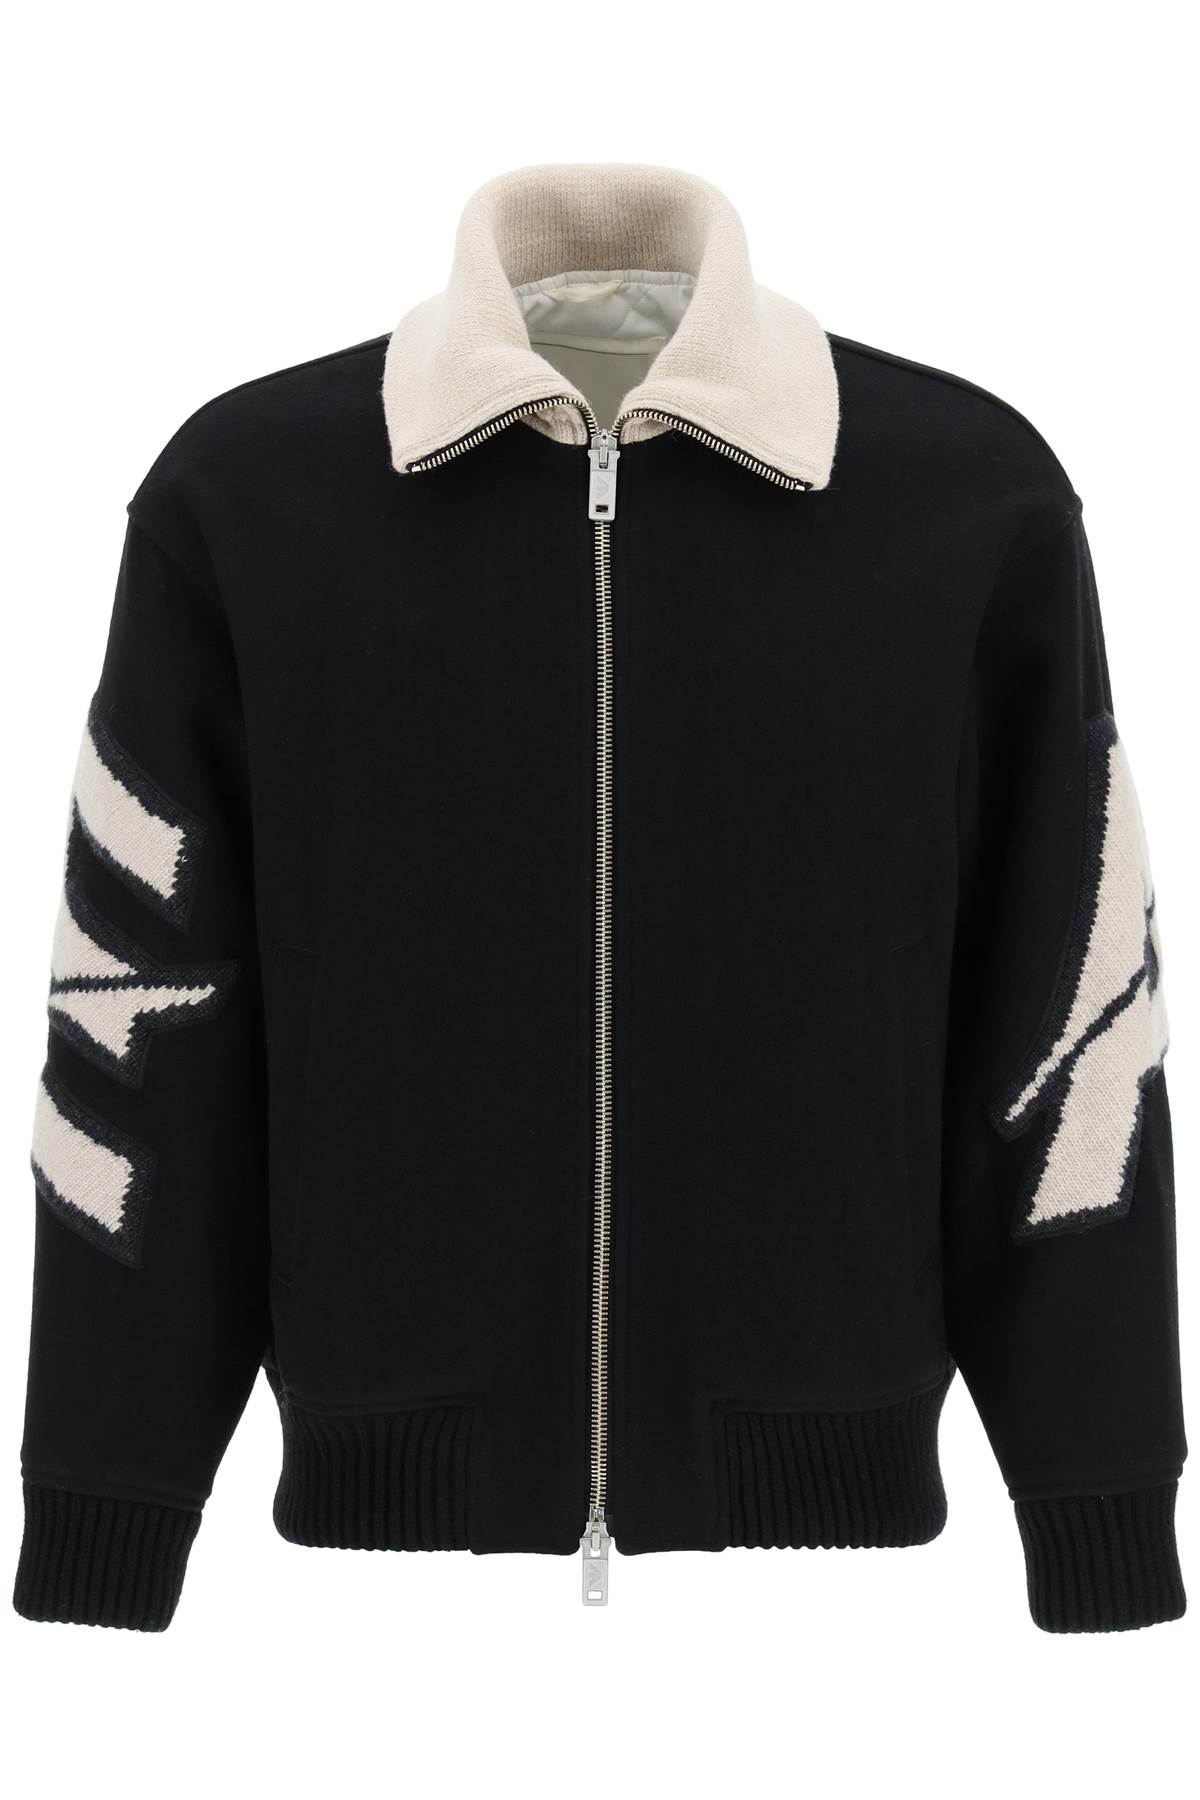 EMPORIO ARMANI WOOL BLEND JACKET WITH KNIT PATCHES